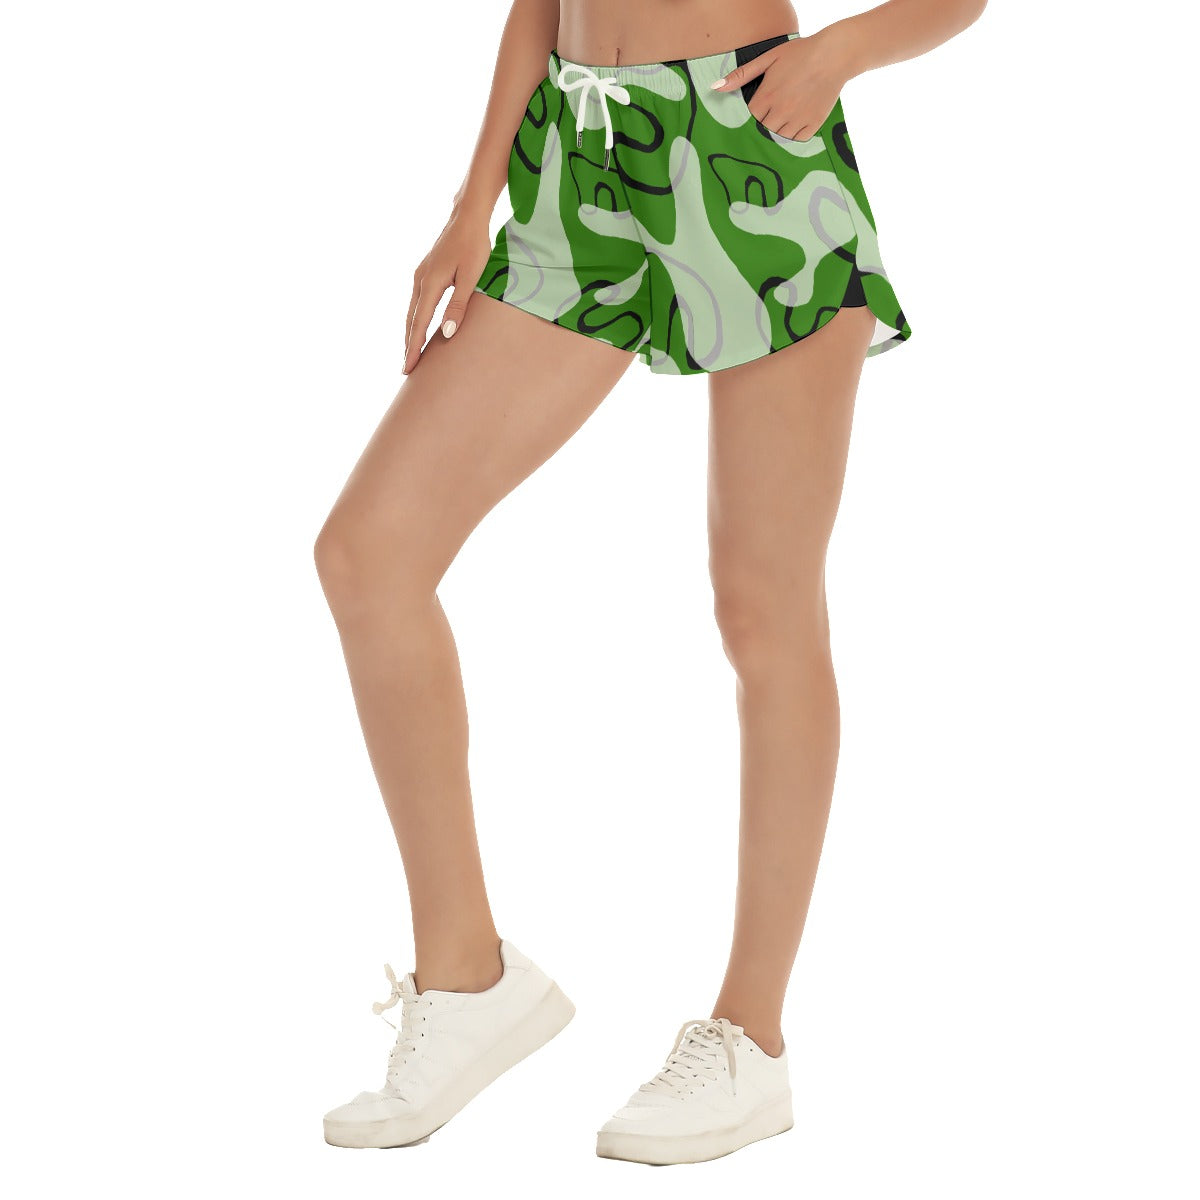 Kati - Doodle - Pickleball Shorts by Dizzy Pickle